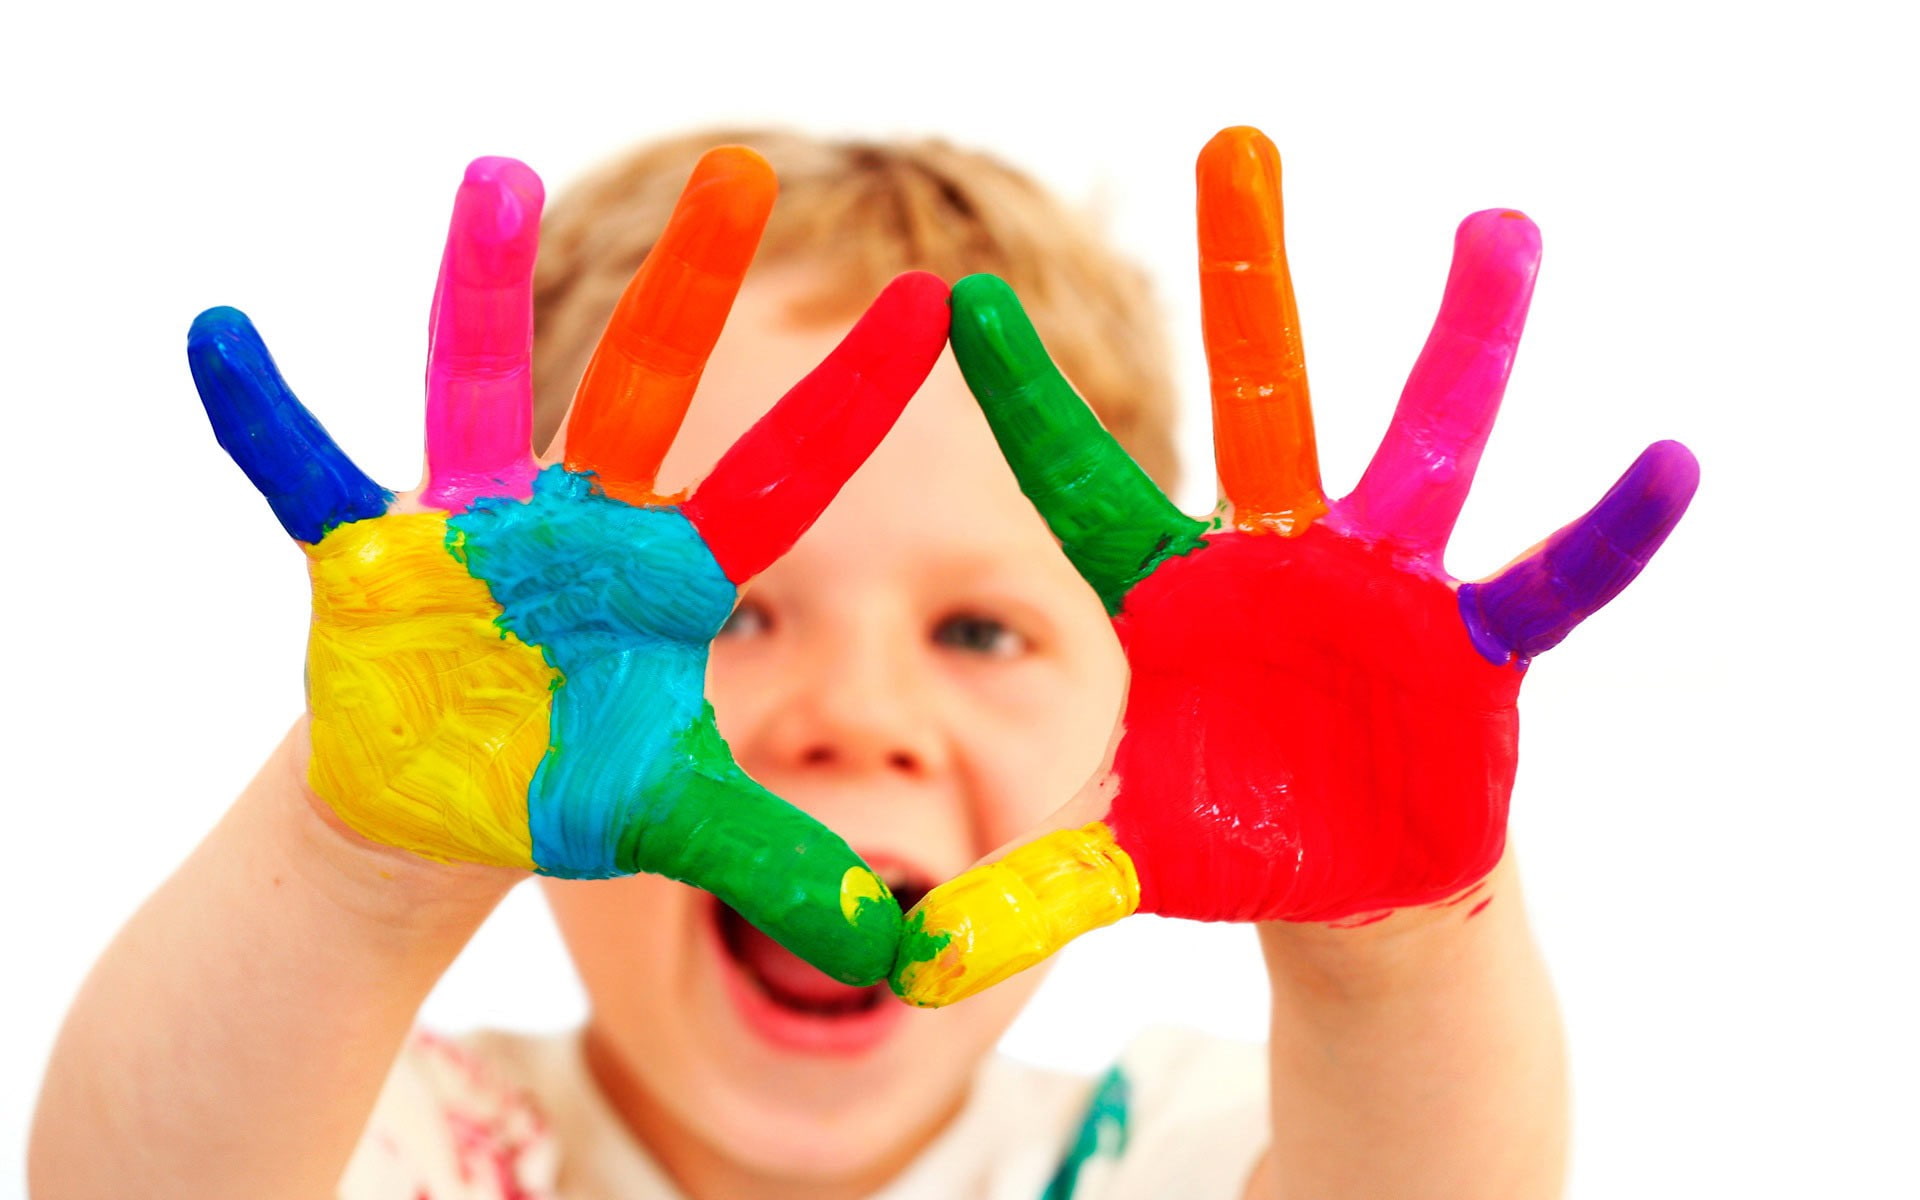 children, childhood, multi colored, human hand, offspring, white background